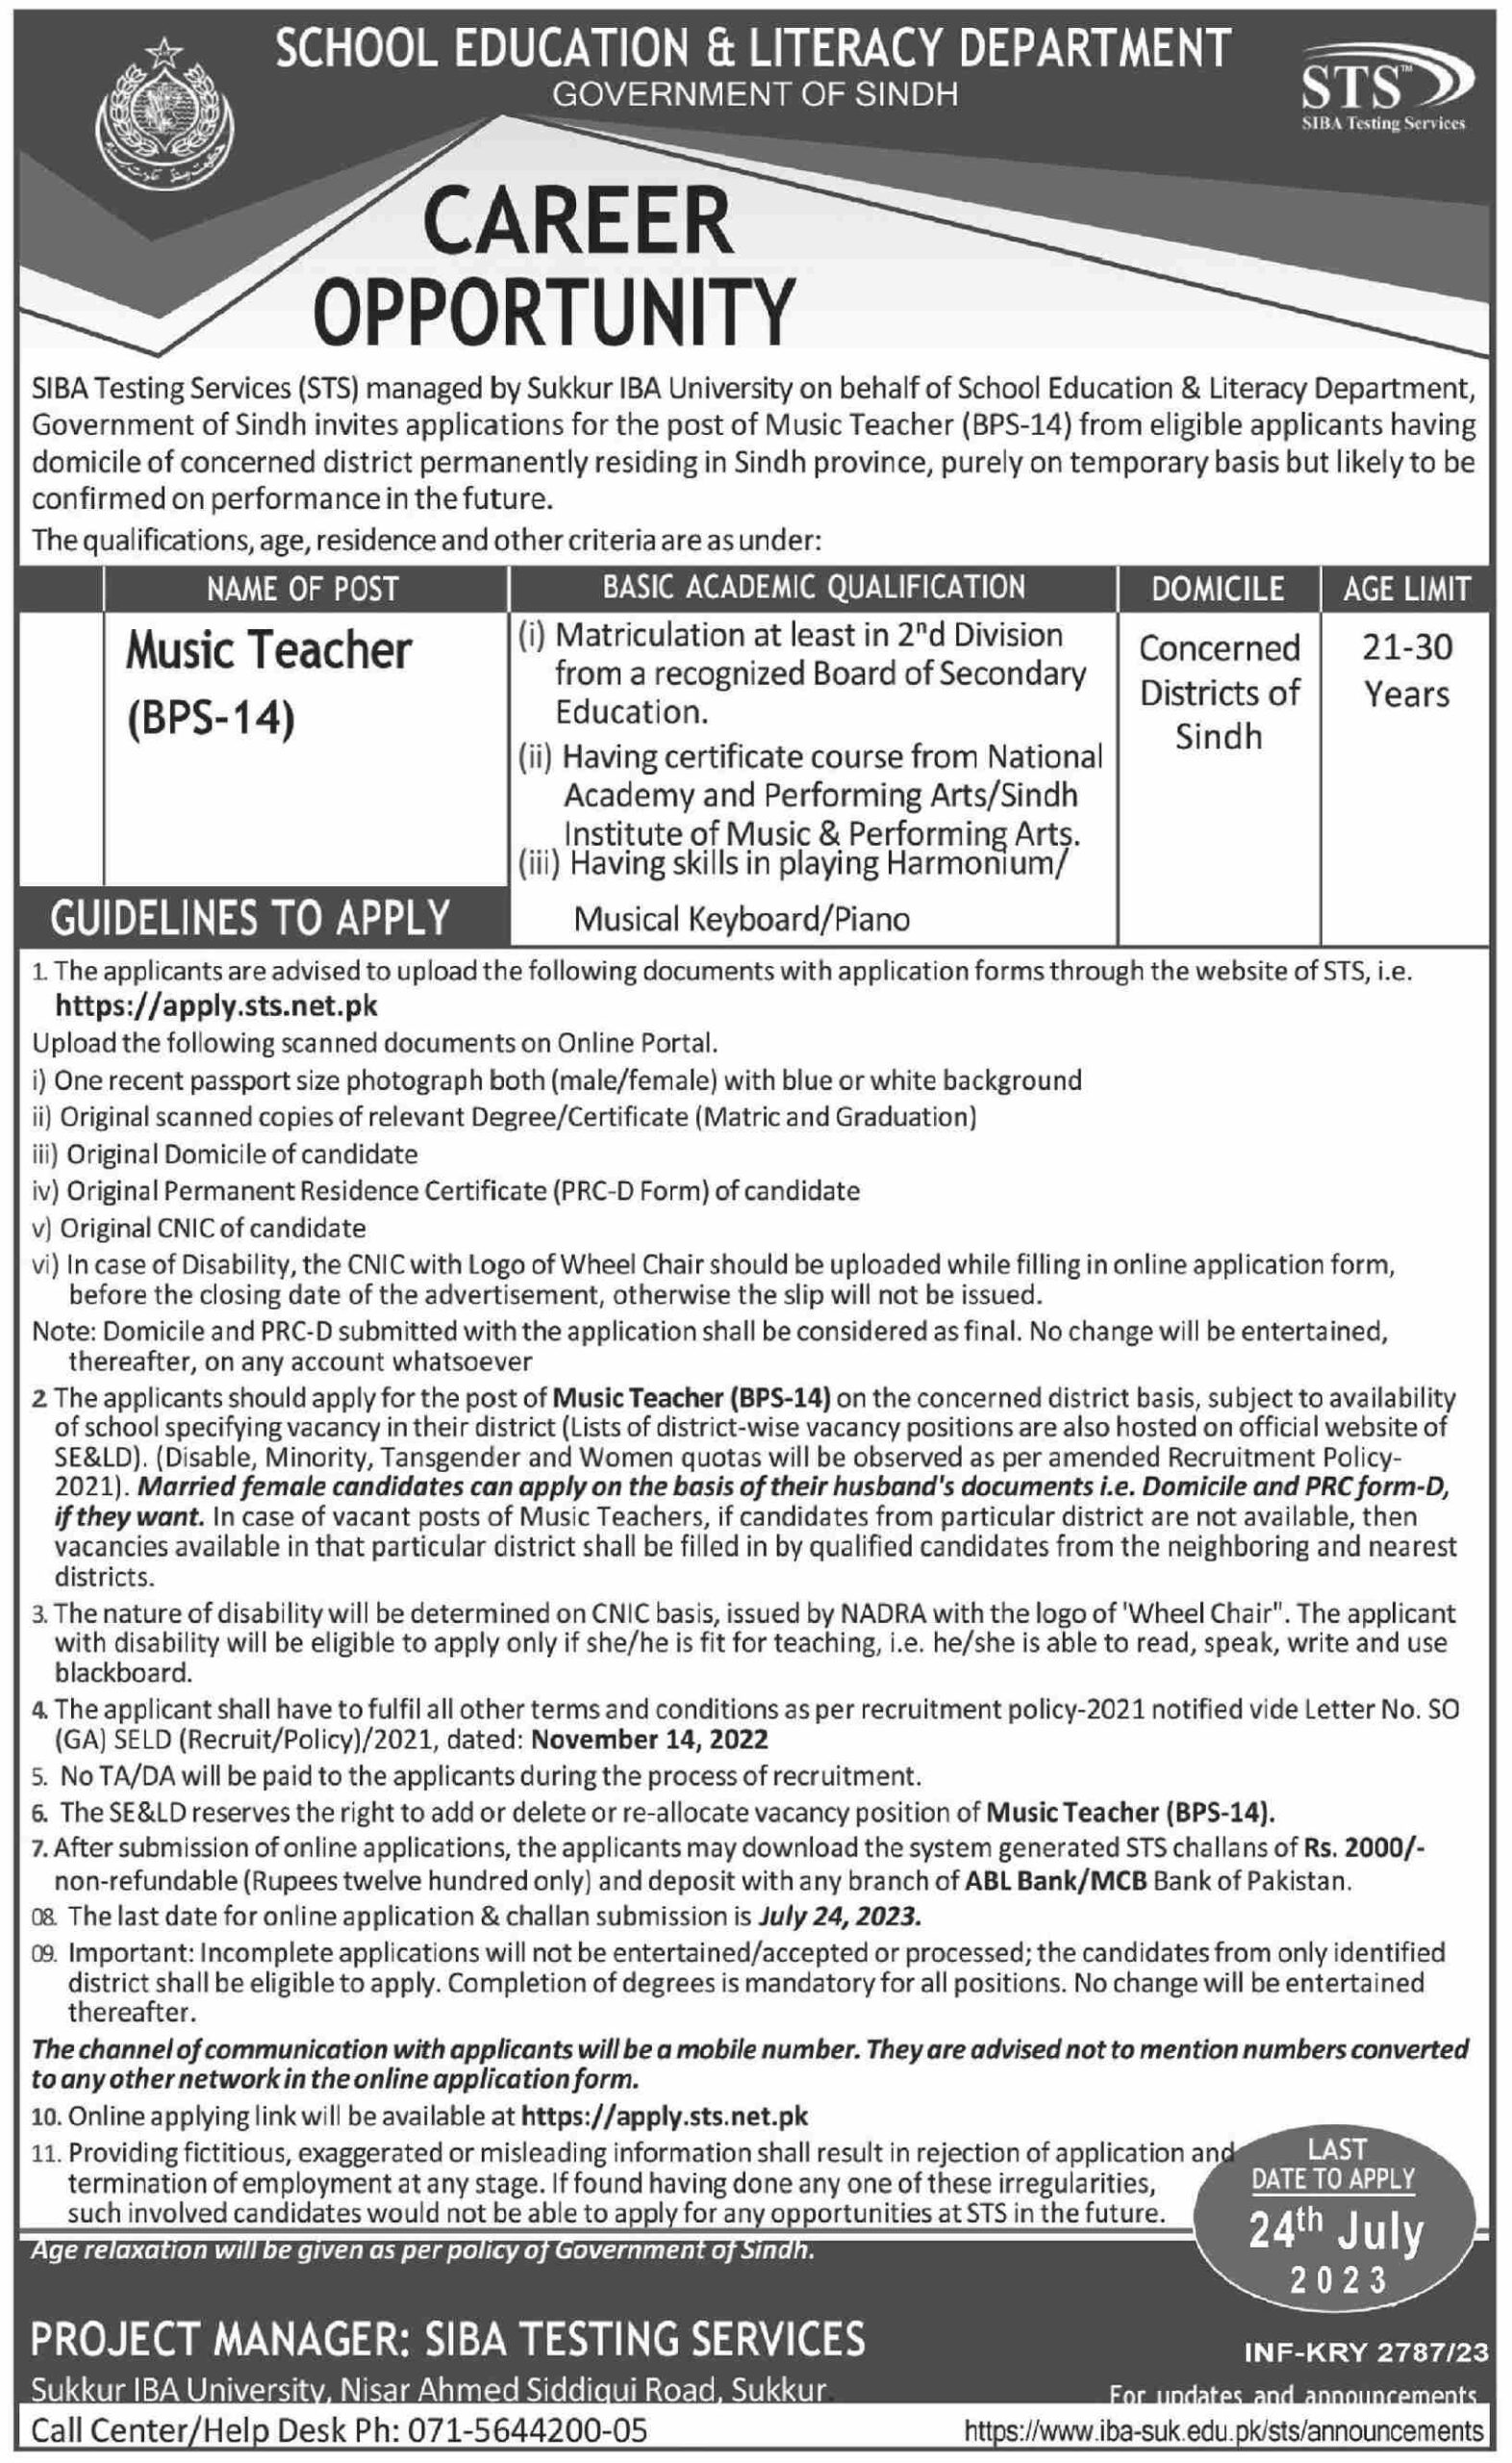 Government of Sindh Jobs 2023 – School Education & Literacy Department Sindh Jobs 2023